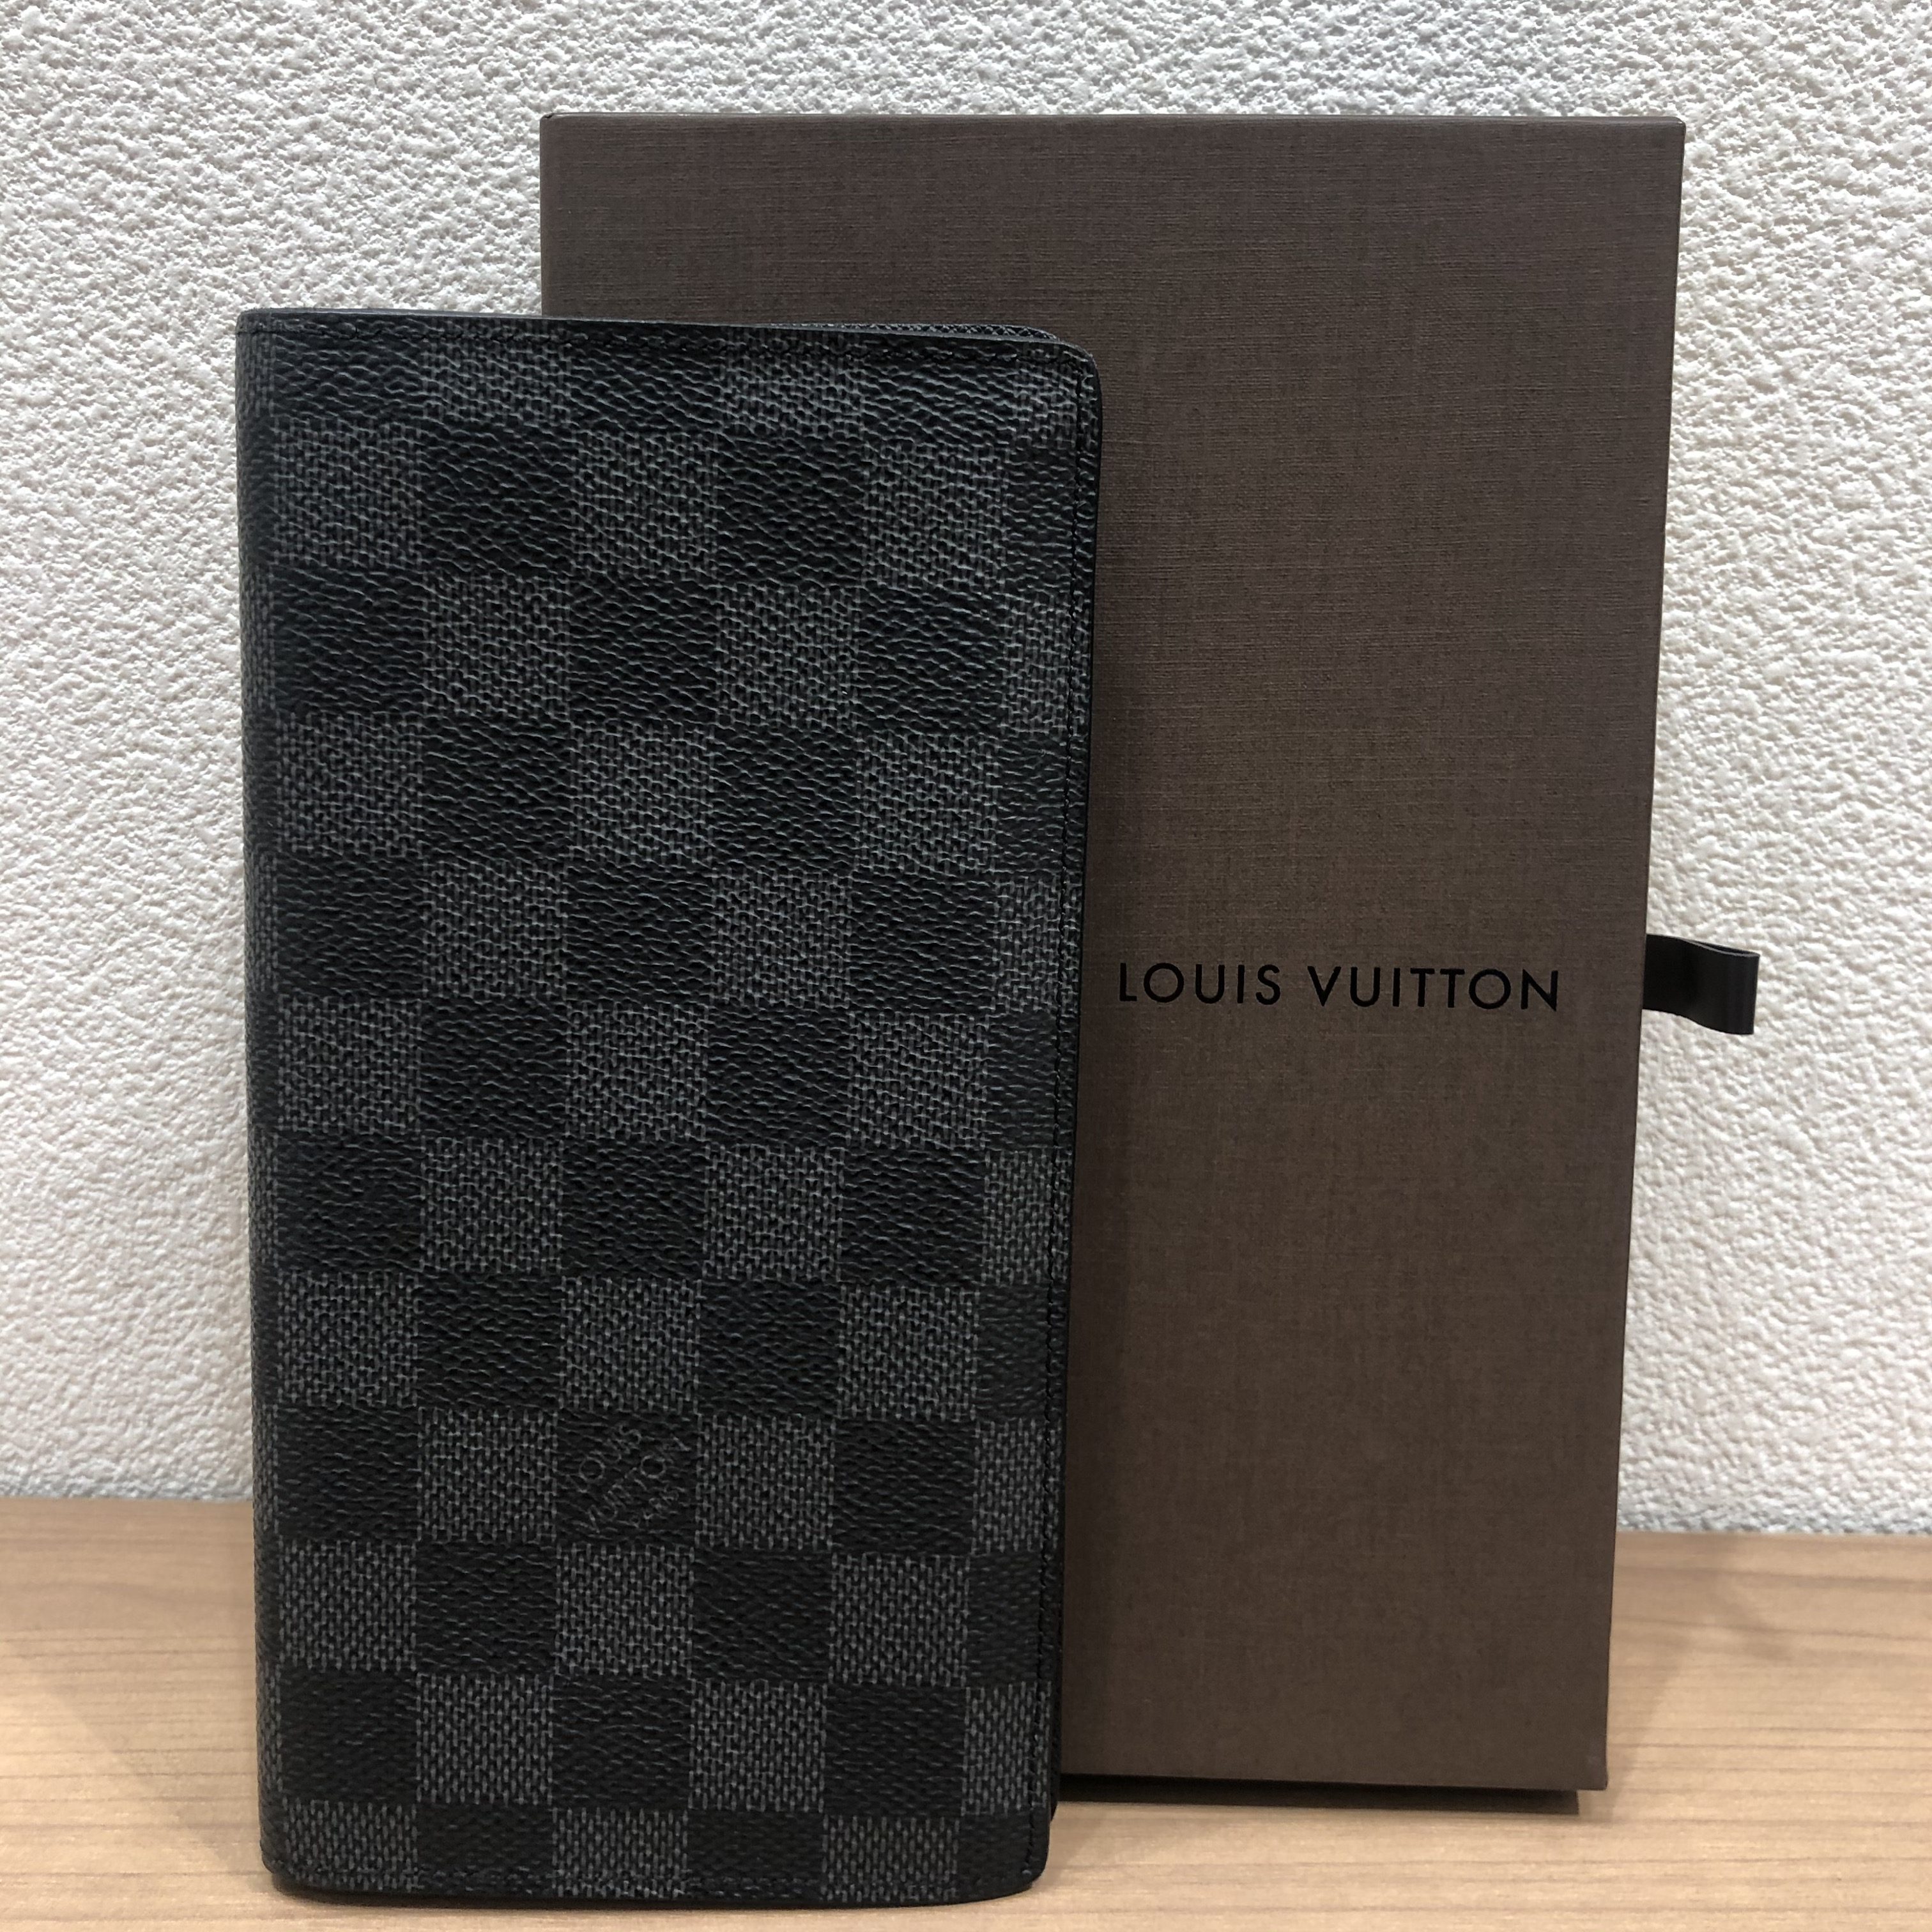 【LOUIS VUITTON/ルイヴィトン】ダミエグラフィット ポルトフォイユロン N62227